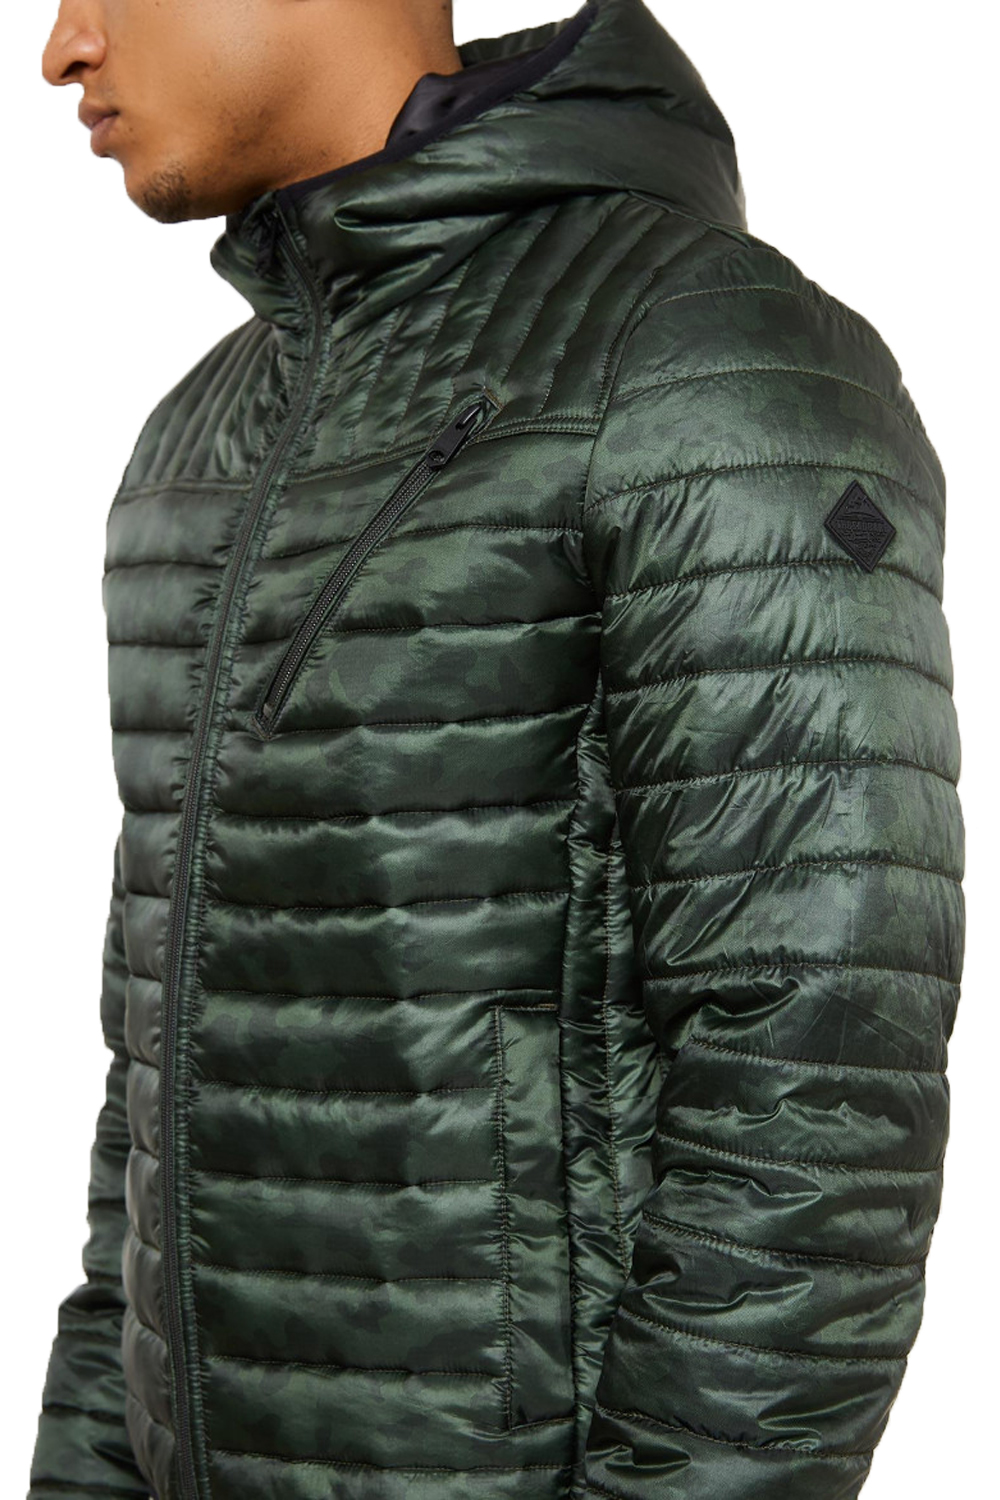 Threadbare Mens Parrot Hooded Padded Coat Designer Camo Quilted Puffer Jacket